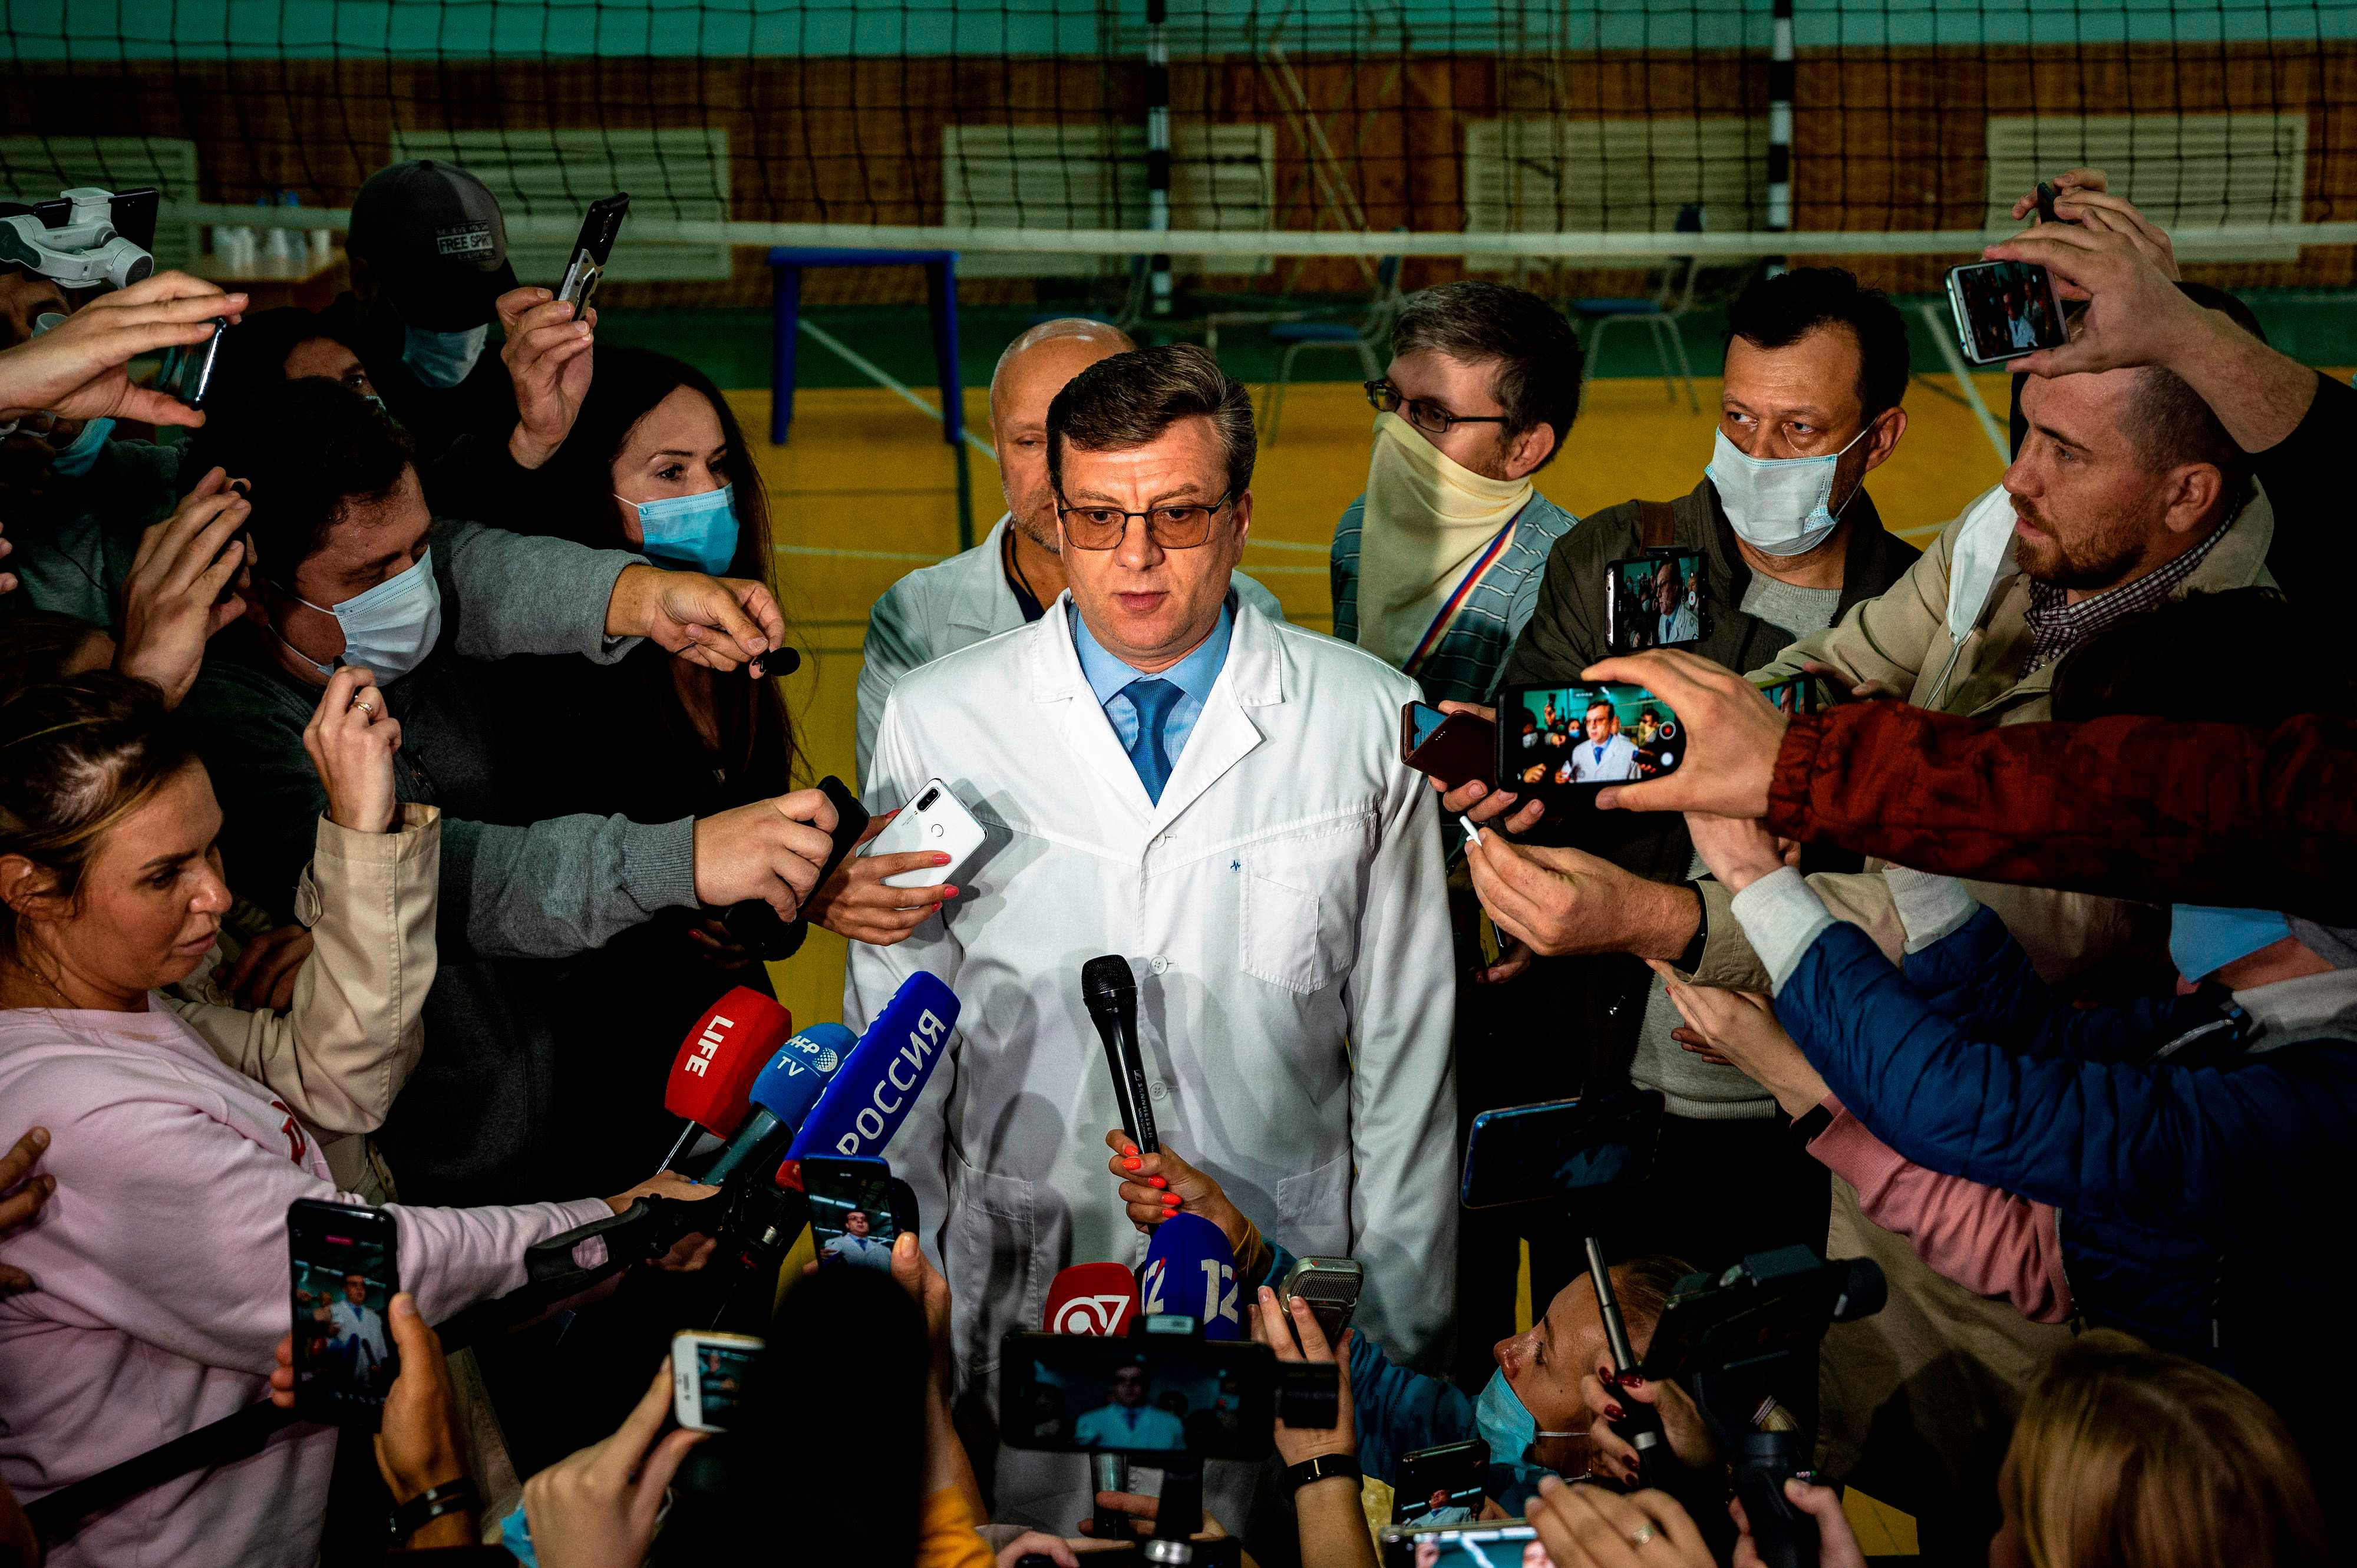 Alexander Murakhovsky, chief doctor at Omsk Emergency Hospital No. 1 where Alexei Navalny was admitted after he fell ill in what his spokeswoman said was a suspected poisoning, speaks to the media in Omsk on August 21, 2020. - Russian doctors said Kremlin critic Alexei Navalny cannot be moved from the Siberian hospital where he is being treated for suspected poisoning, putting his life at risk, his spokeswoman said. Navalny, a 44-year-old lawyer and anti-corruption campaigner who is among President Vladimir Putin's fiercest critics, was hospitalised in Omsk after he lost consciousness while on a flight and his plane made an emergency landing. Credit: AFP